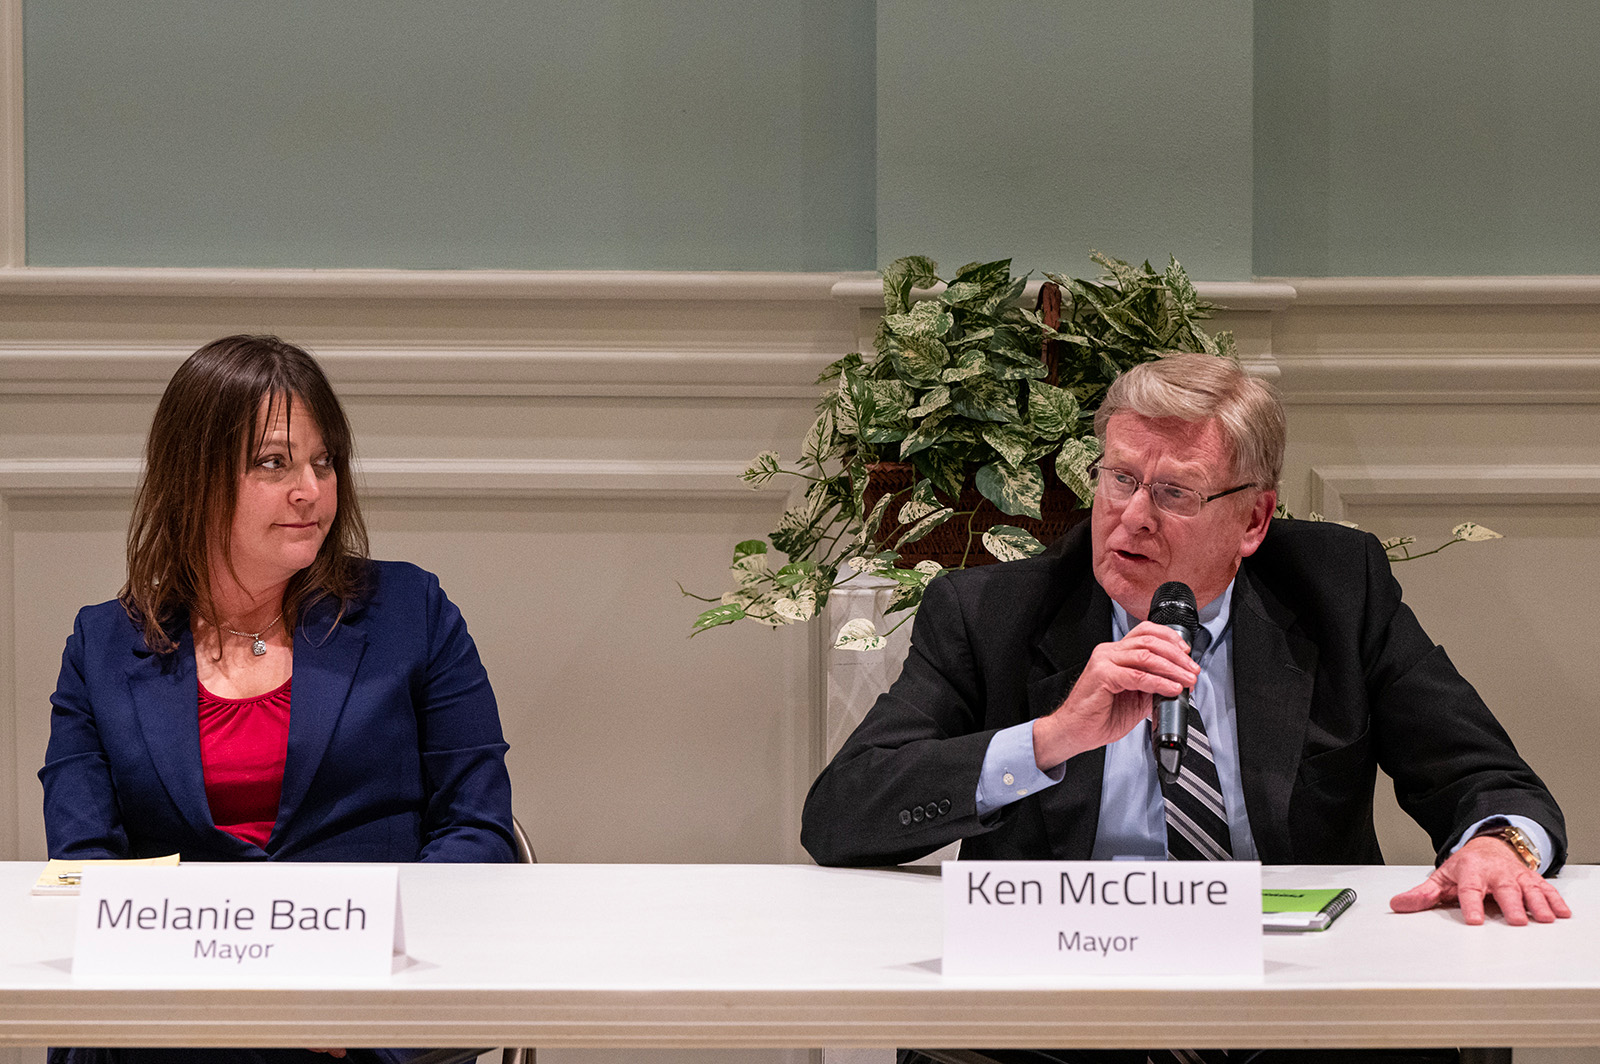 Two candidates for mayor, a man and a woman, sit side-by-side at a community forum